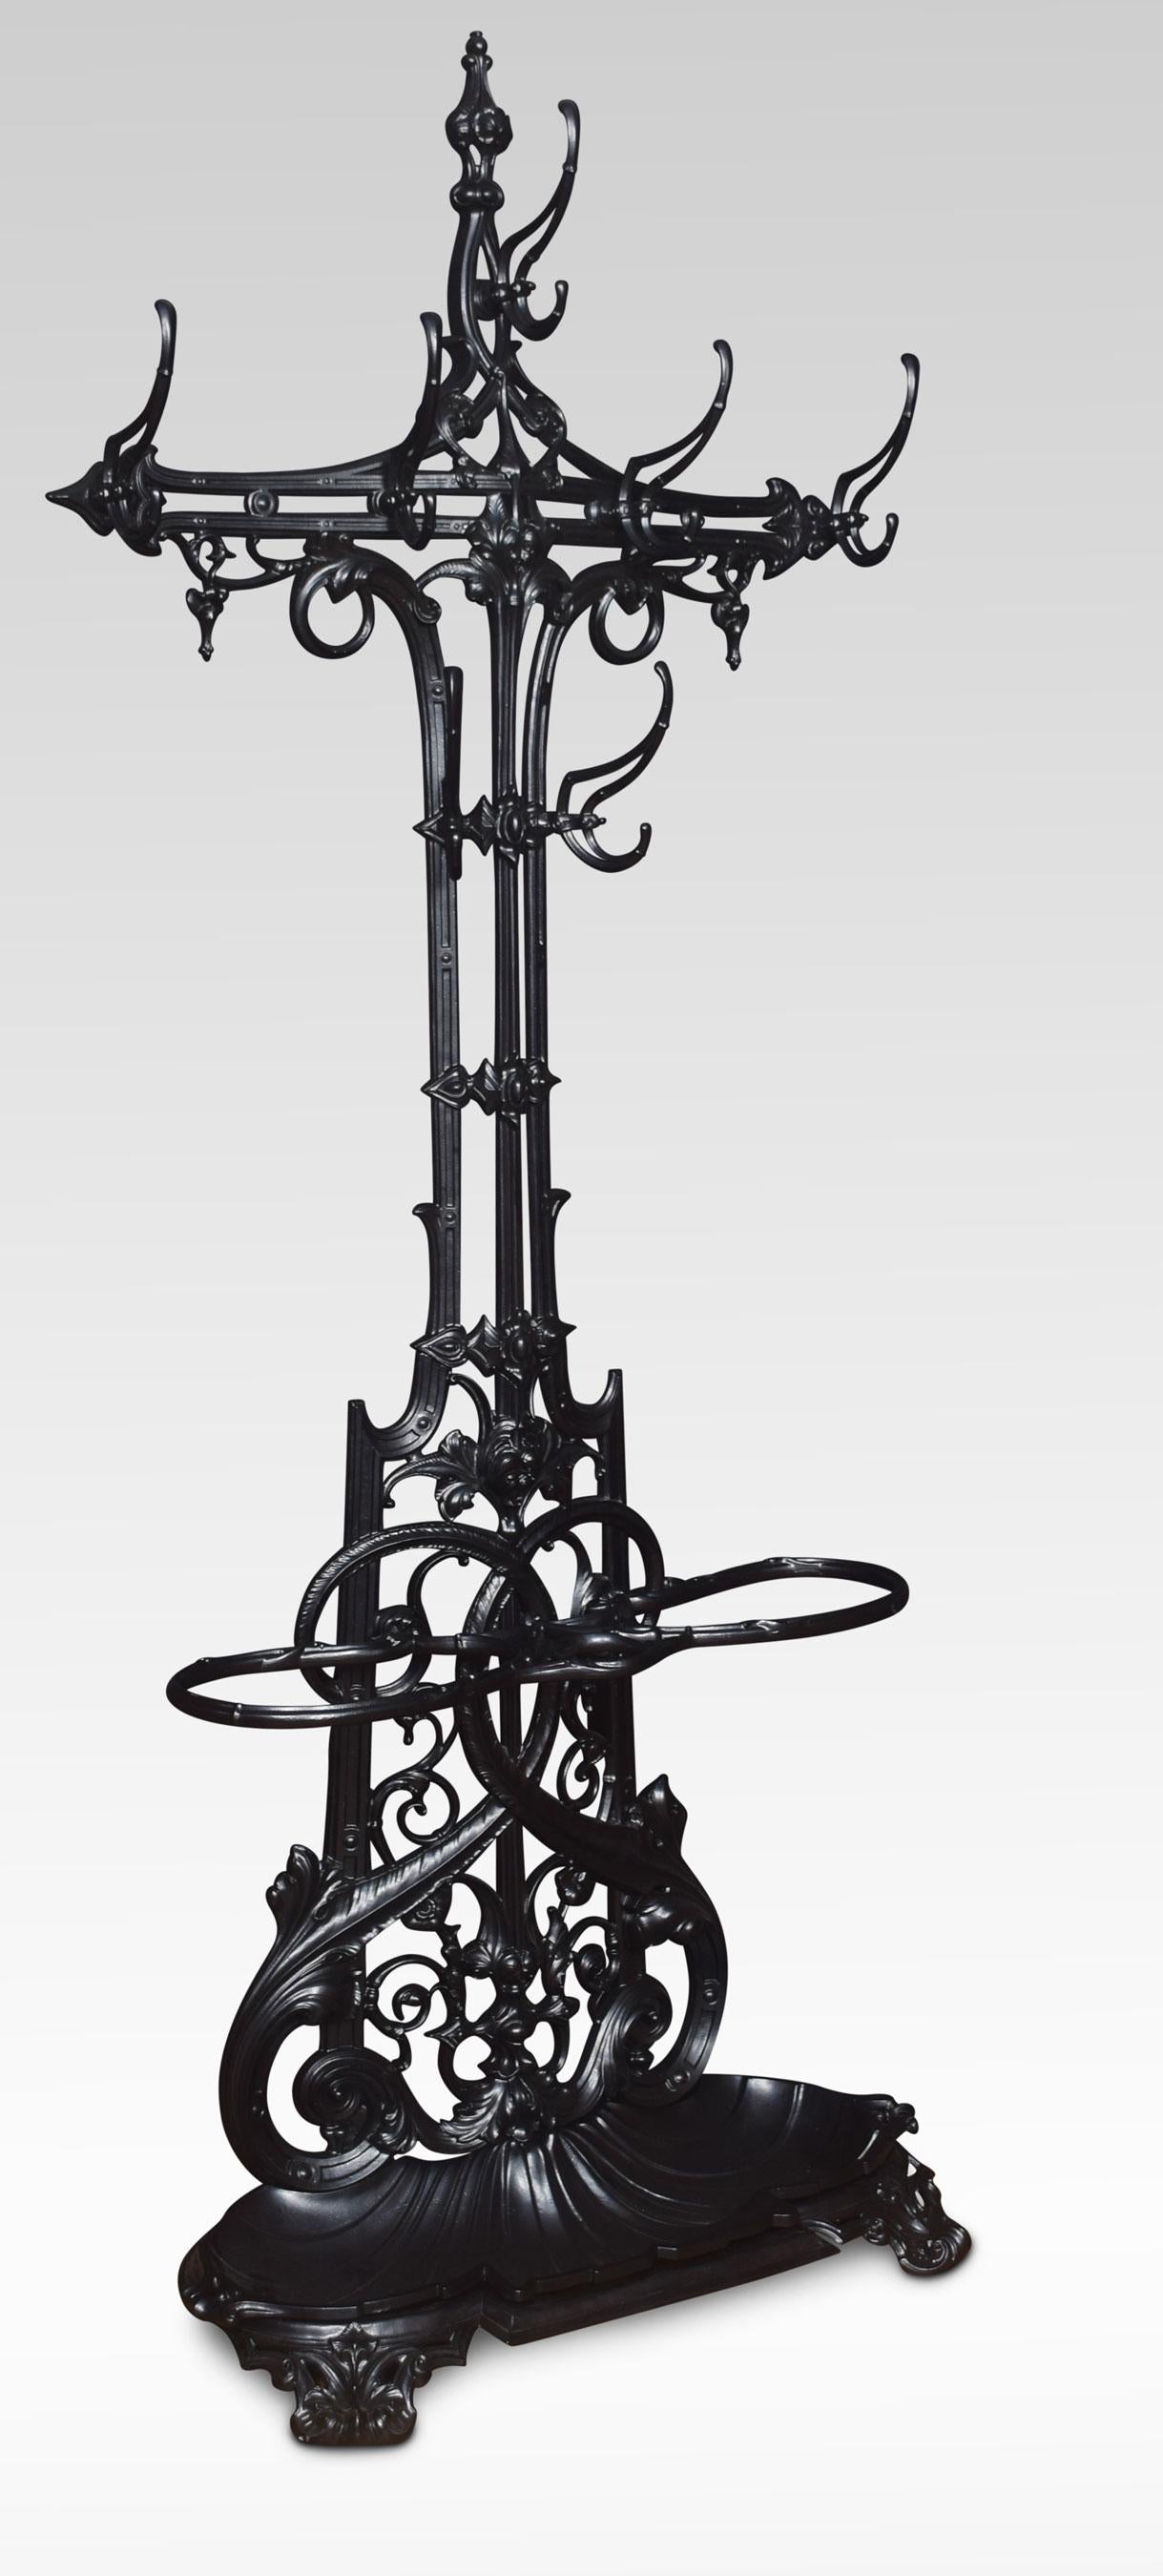 19th century Coalbrookdale cast iron hallstand with a pierced naturalized frame with an arrangement of coat hooks over a figure of eight double umbrella stand above drip tray raised up on scroll front feet
Dimensions:
Height 79 inches
Width 33